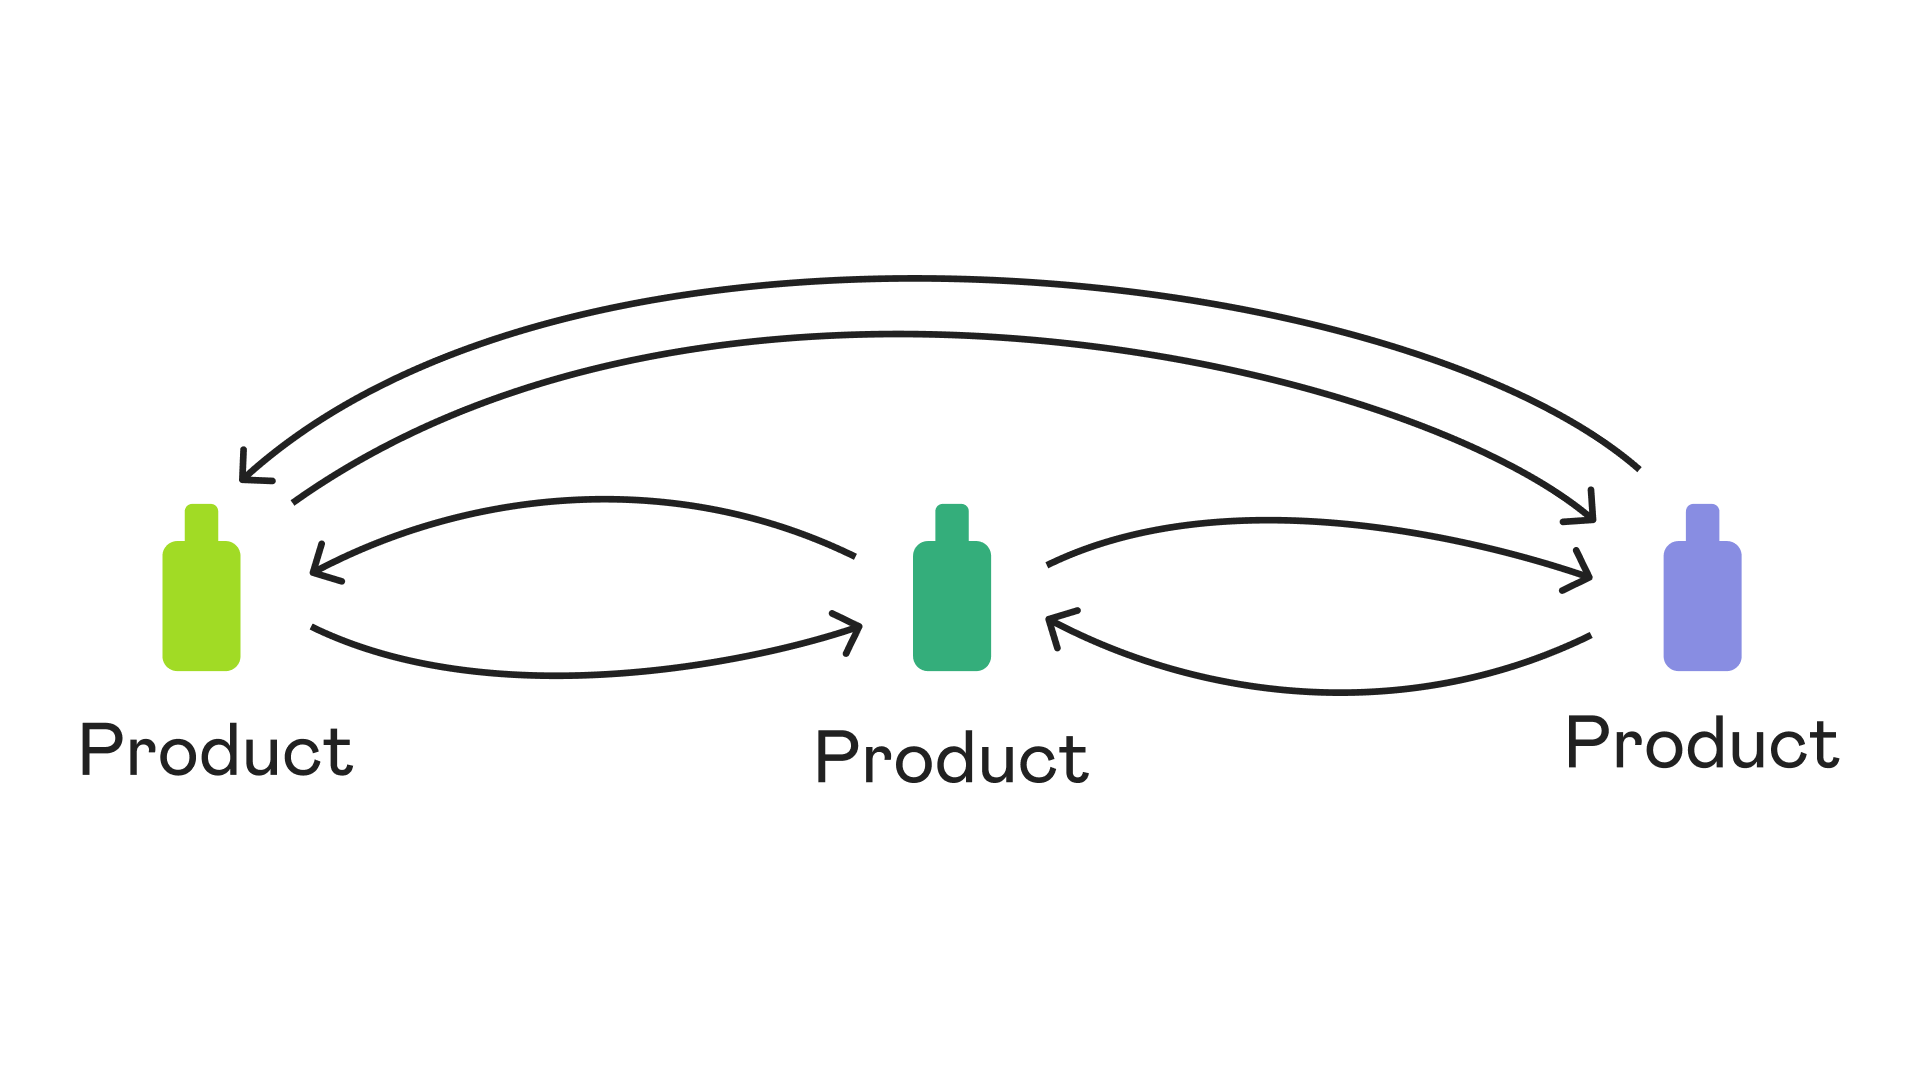 Two-way grouping within product families